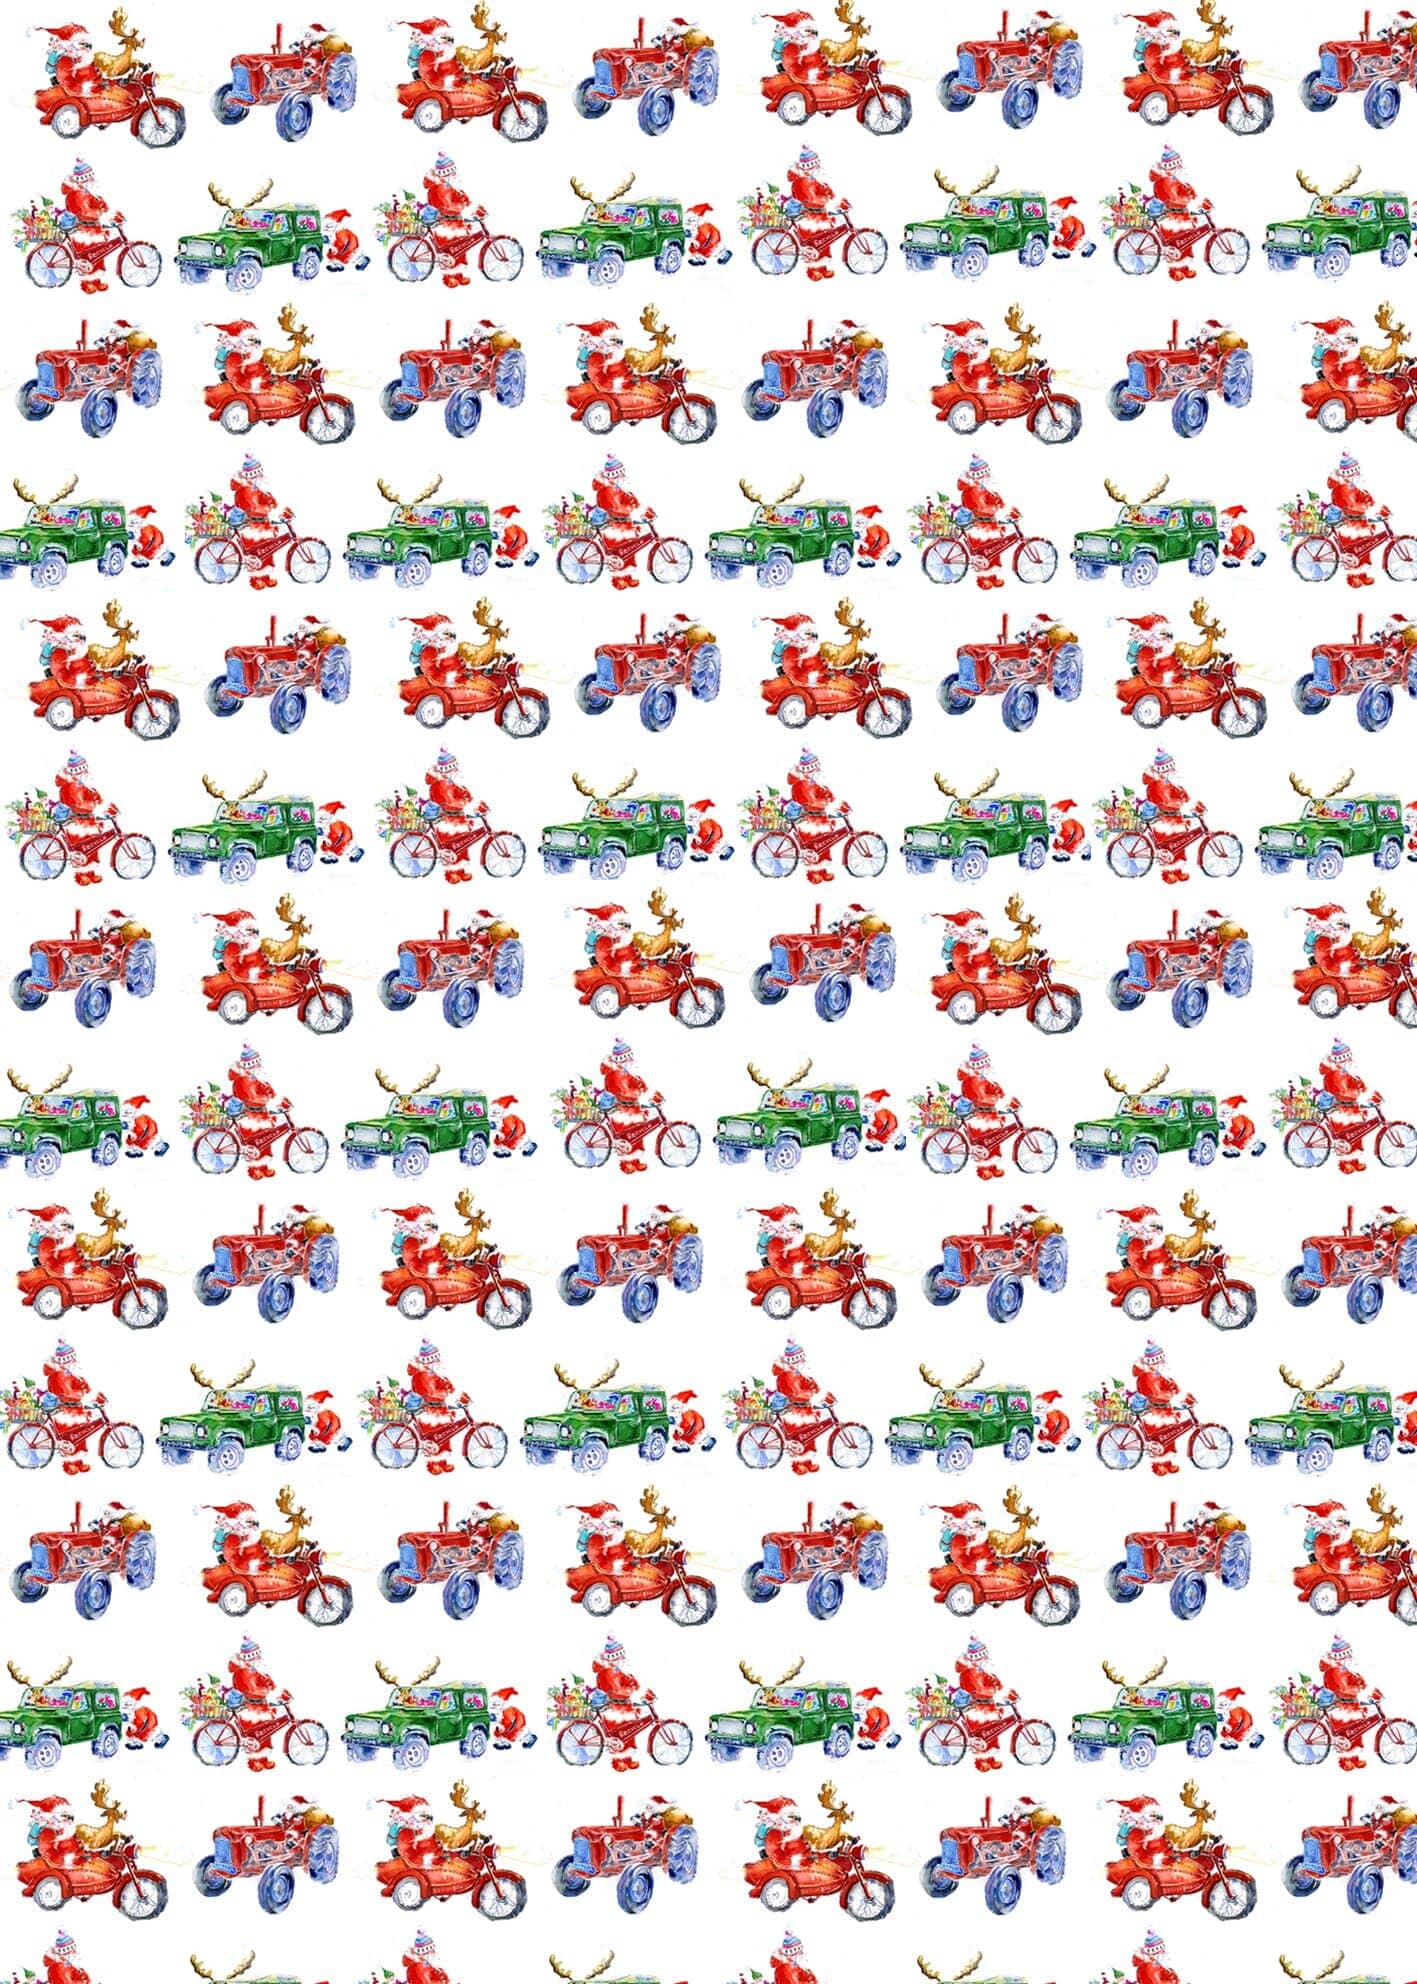 Santa's Christmas Vehicles Gift Wrap designed by artist Sheila Gill
